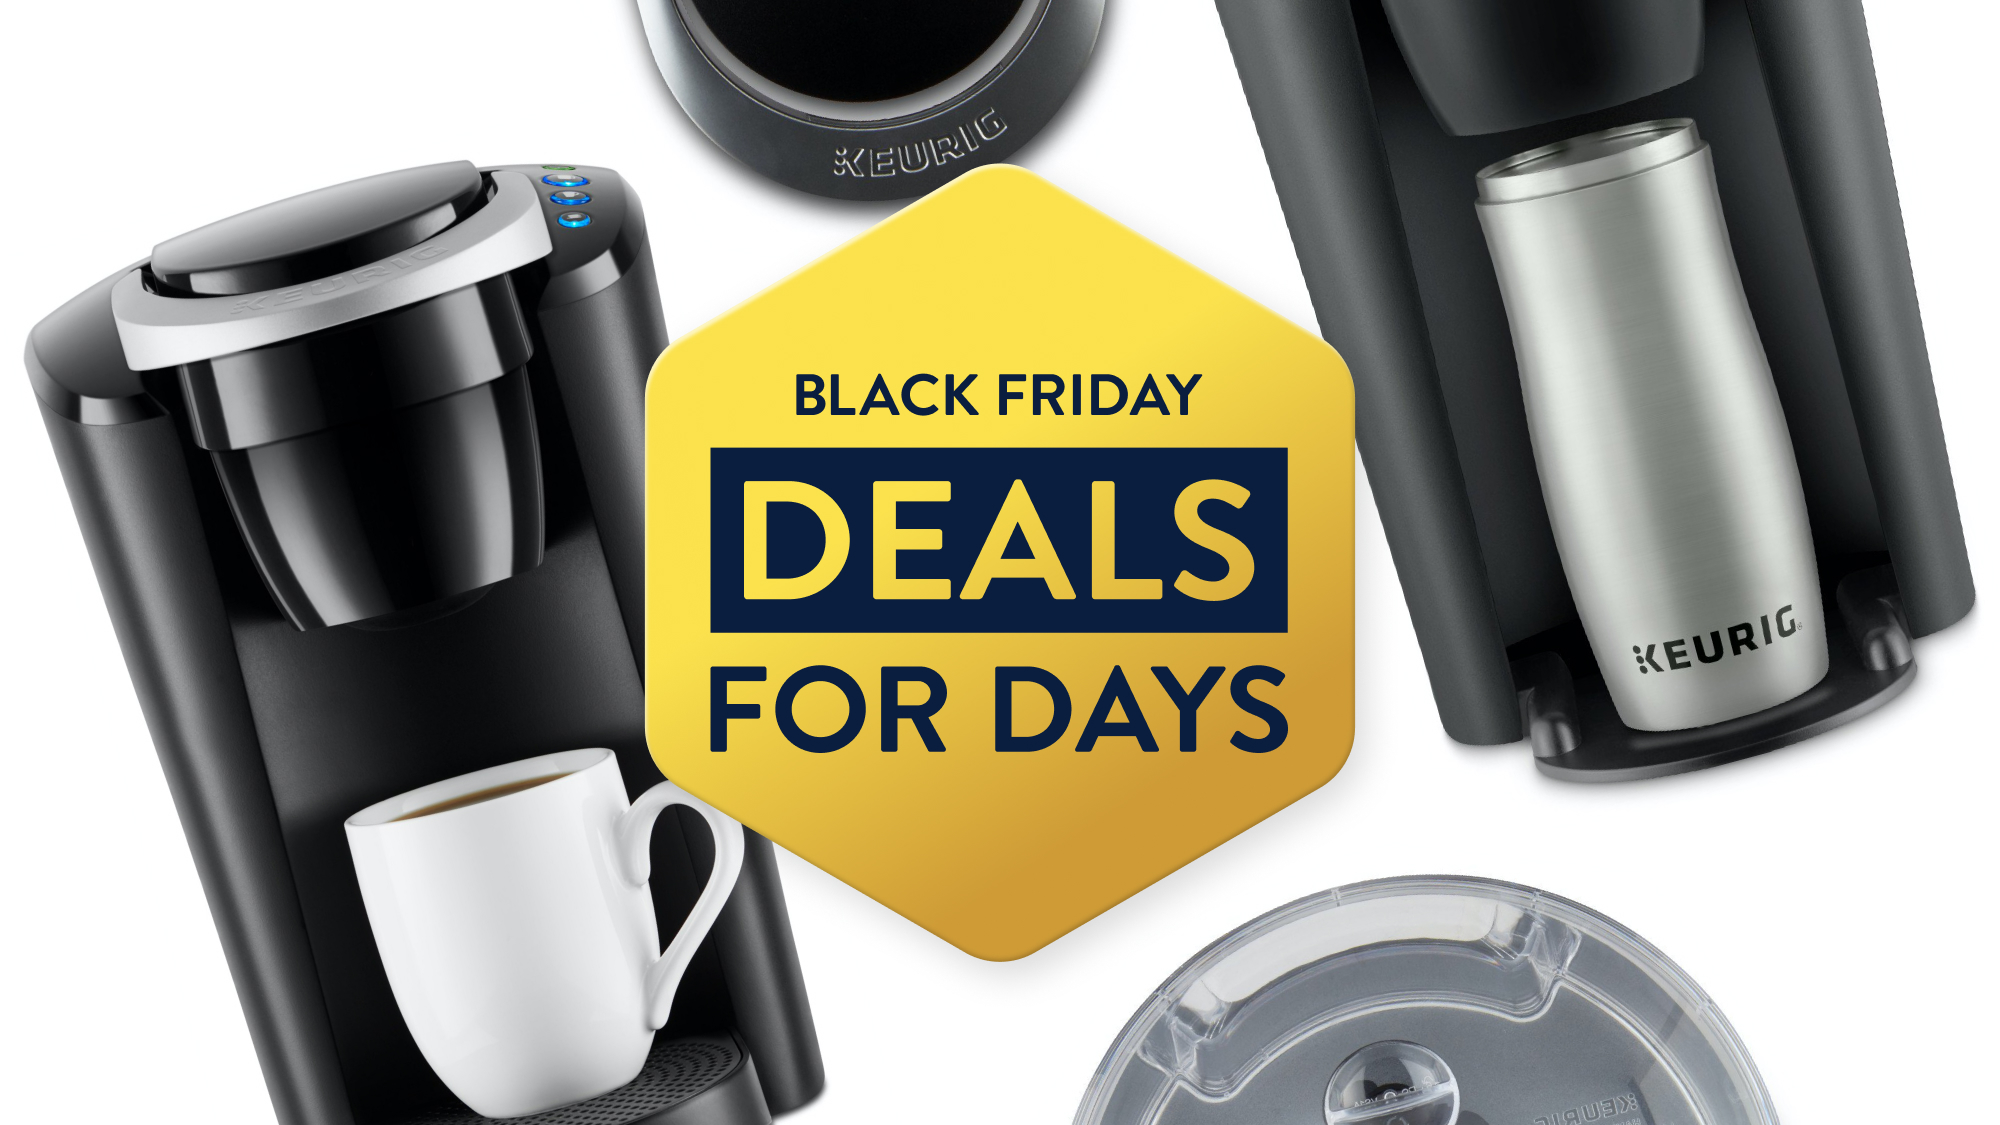 Walmart is Practically Giving Away This Keurig for Cyber Monday